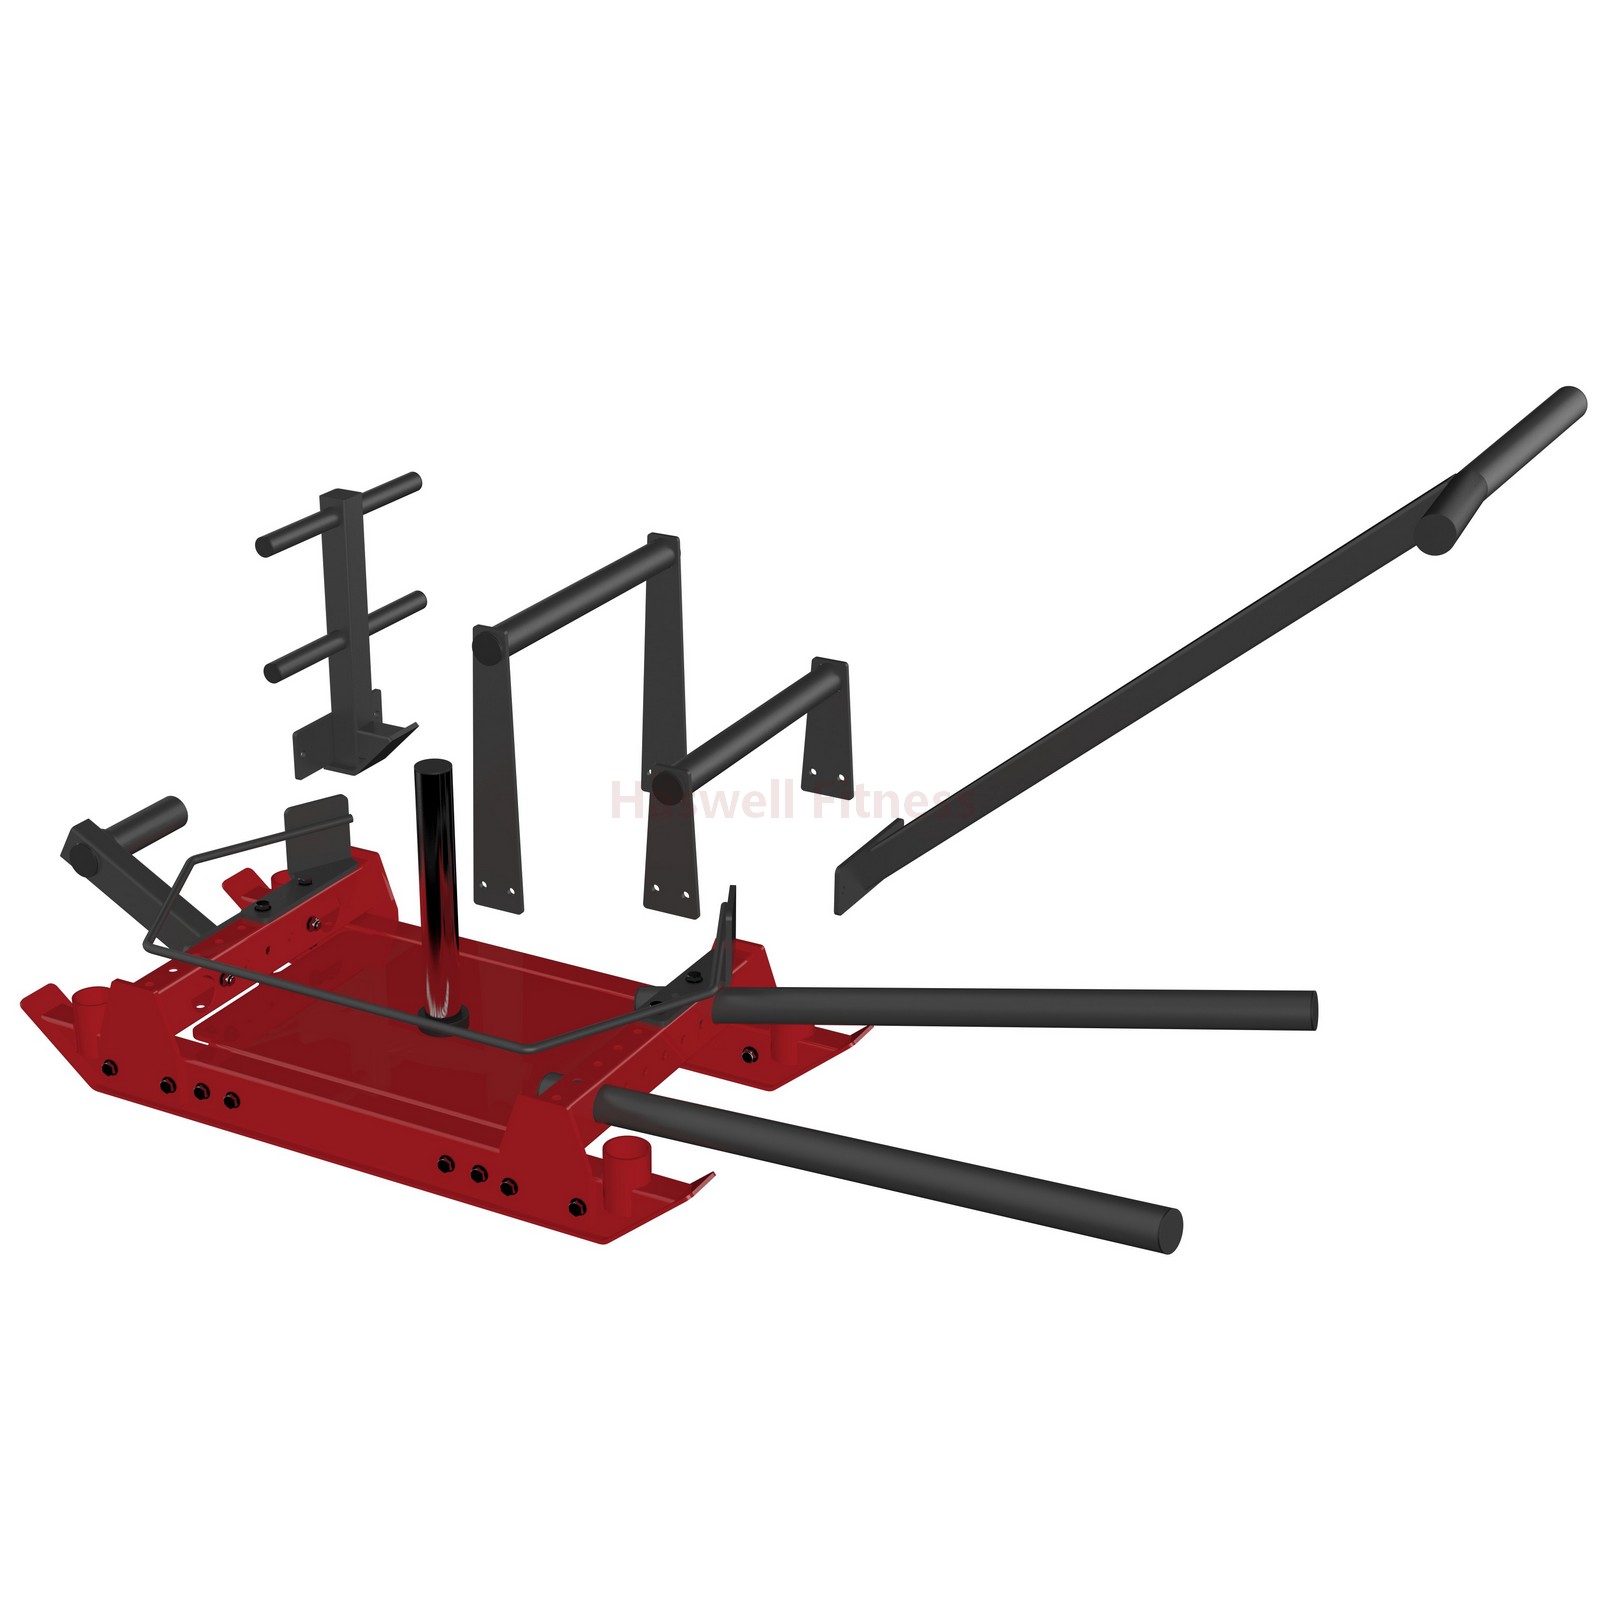 NH-191-4B Sled Gym Machine from China Haswell